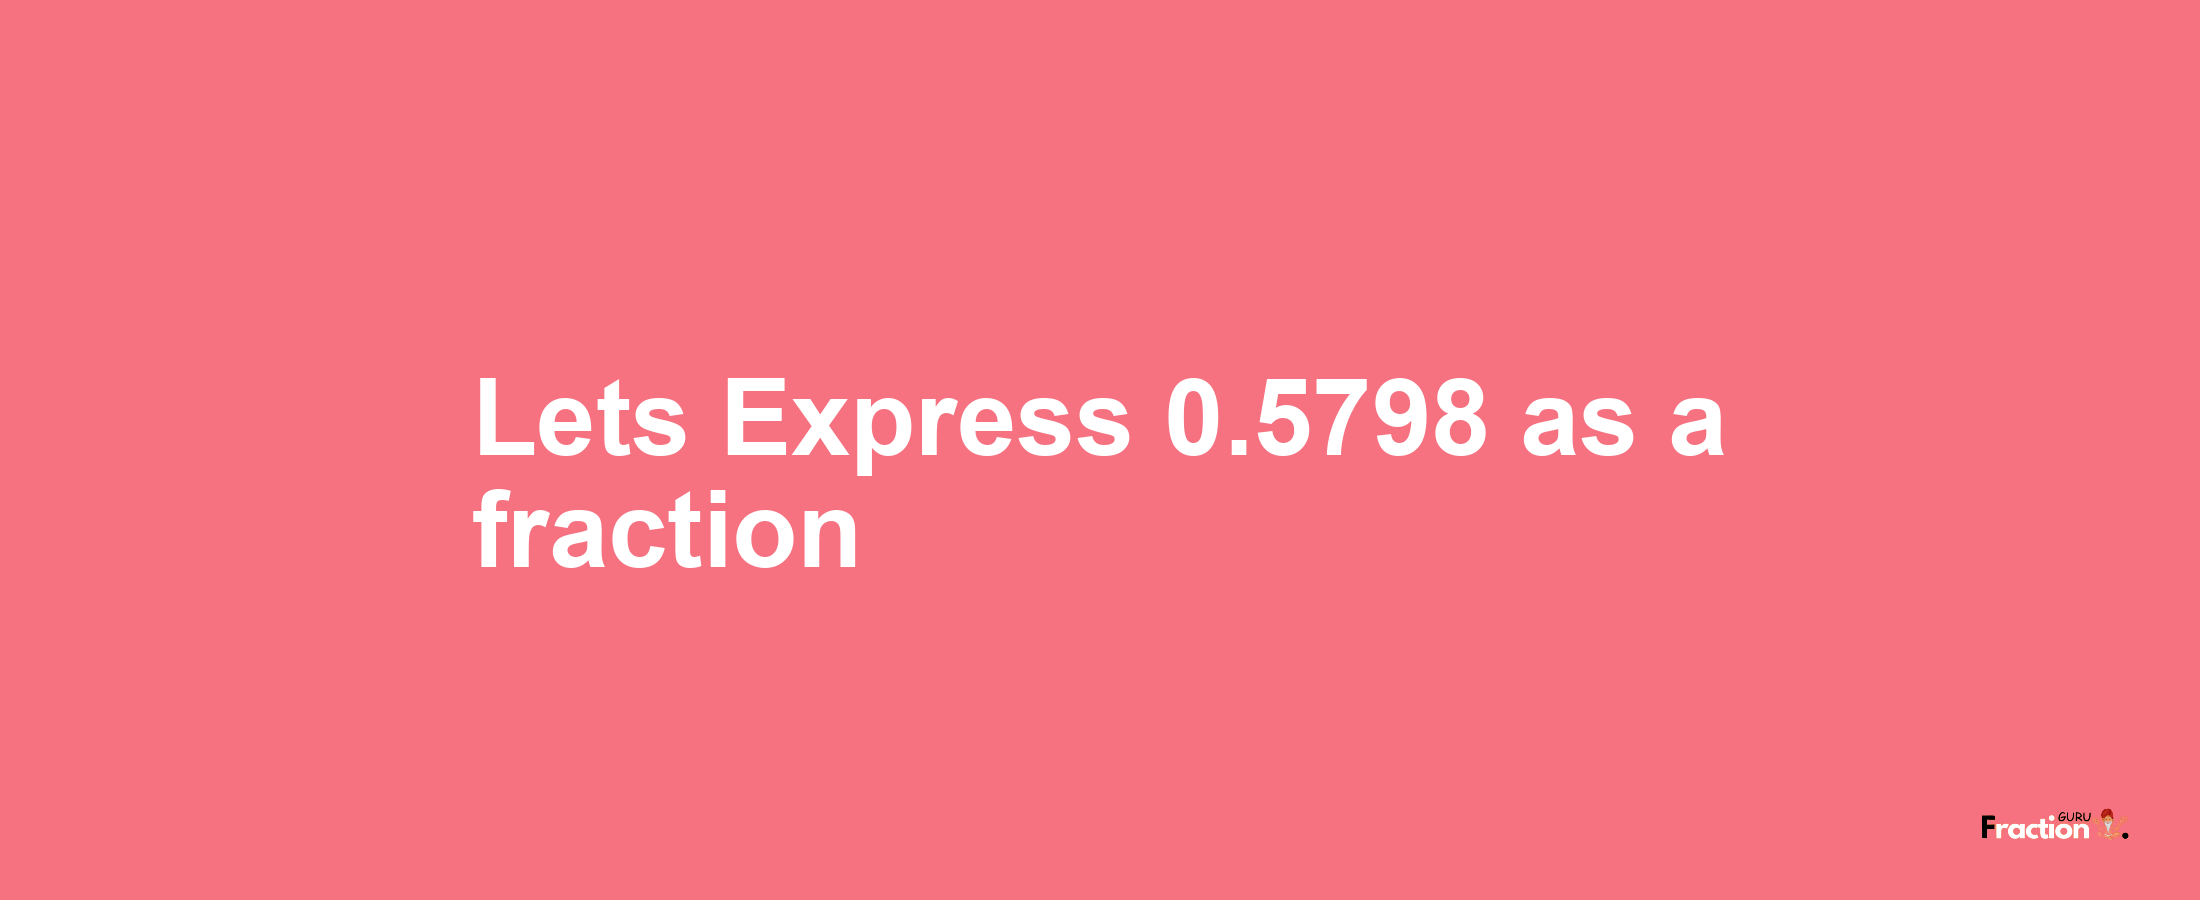 Lets Express 0.5798 as afraction